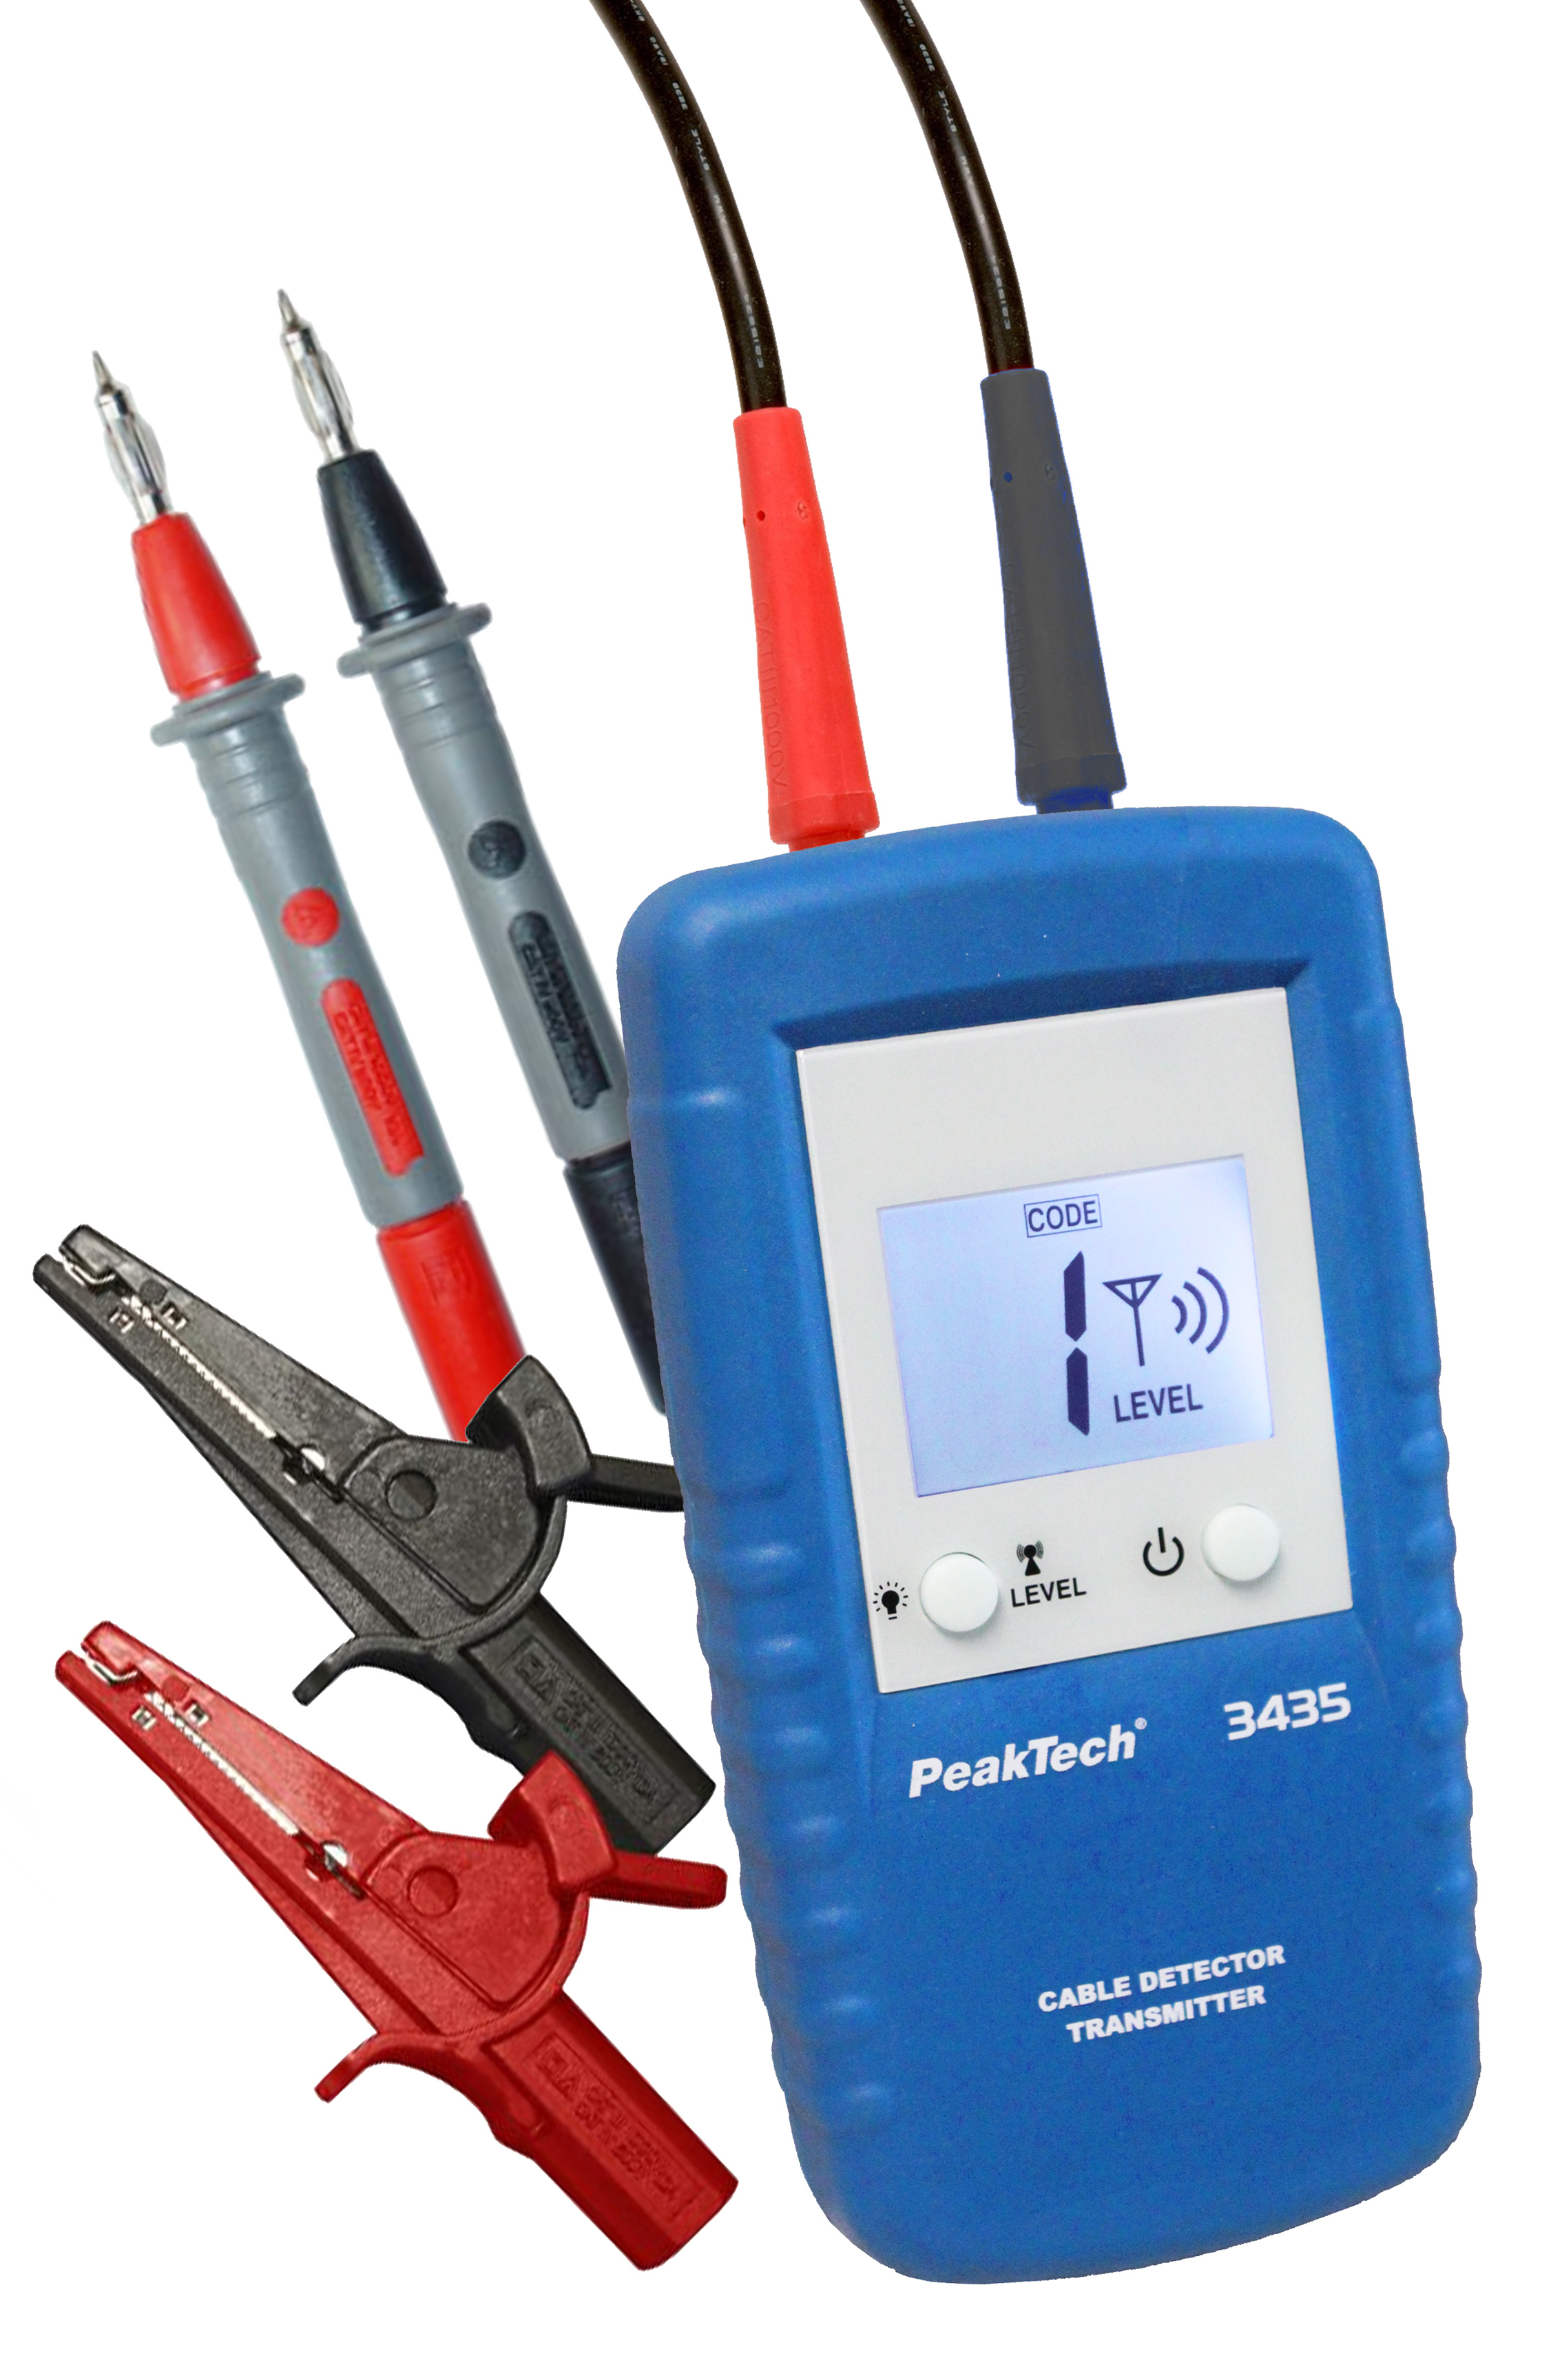 «PeakTech® P 3435 TR» additional transmitter for PeakTech 3435